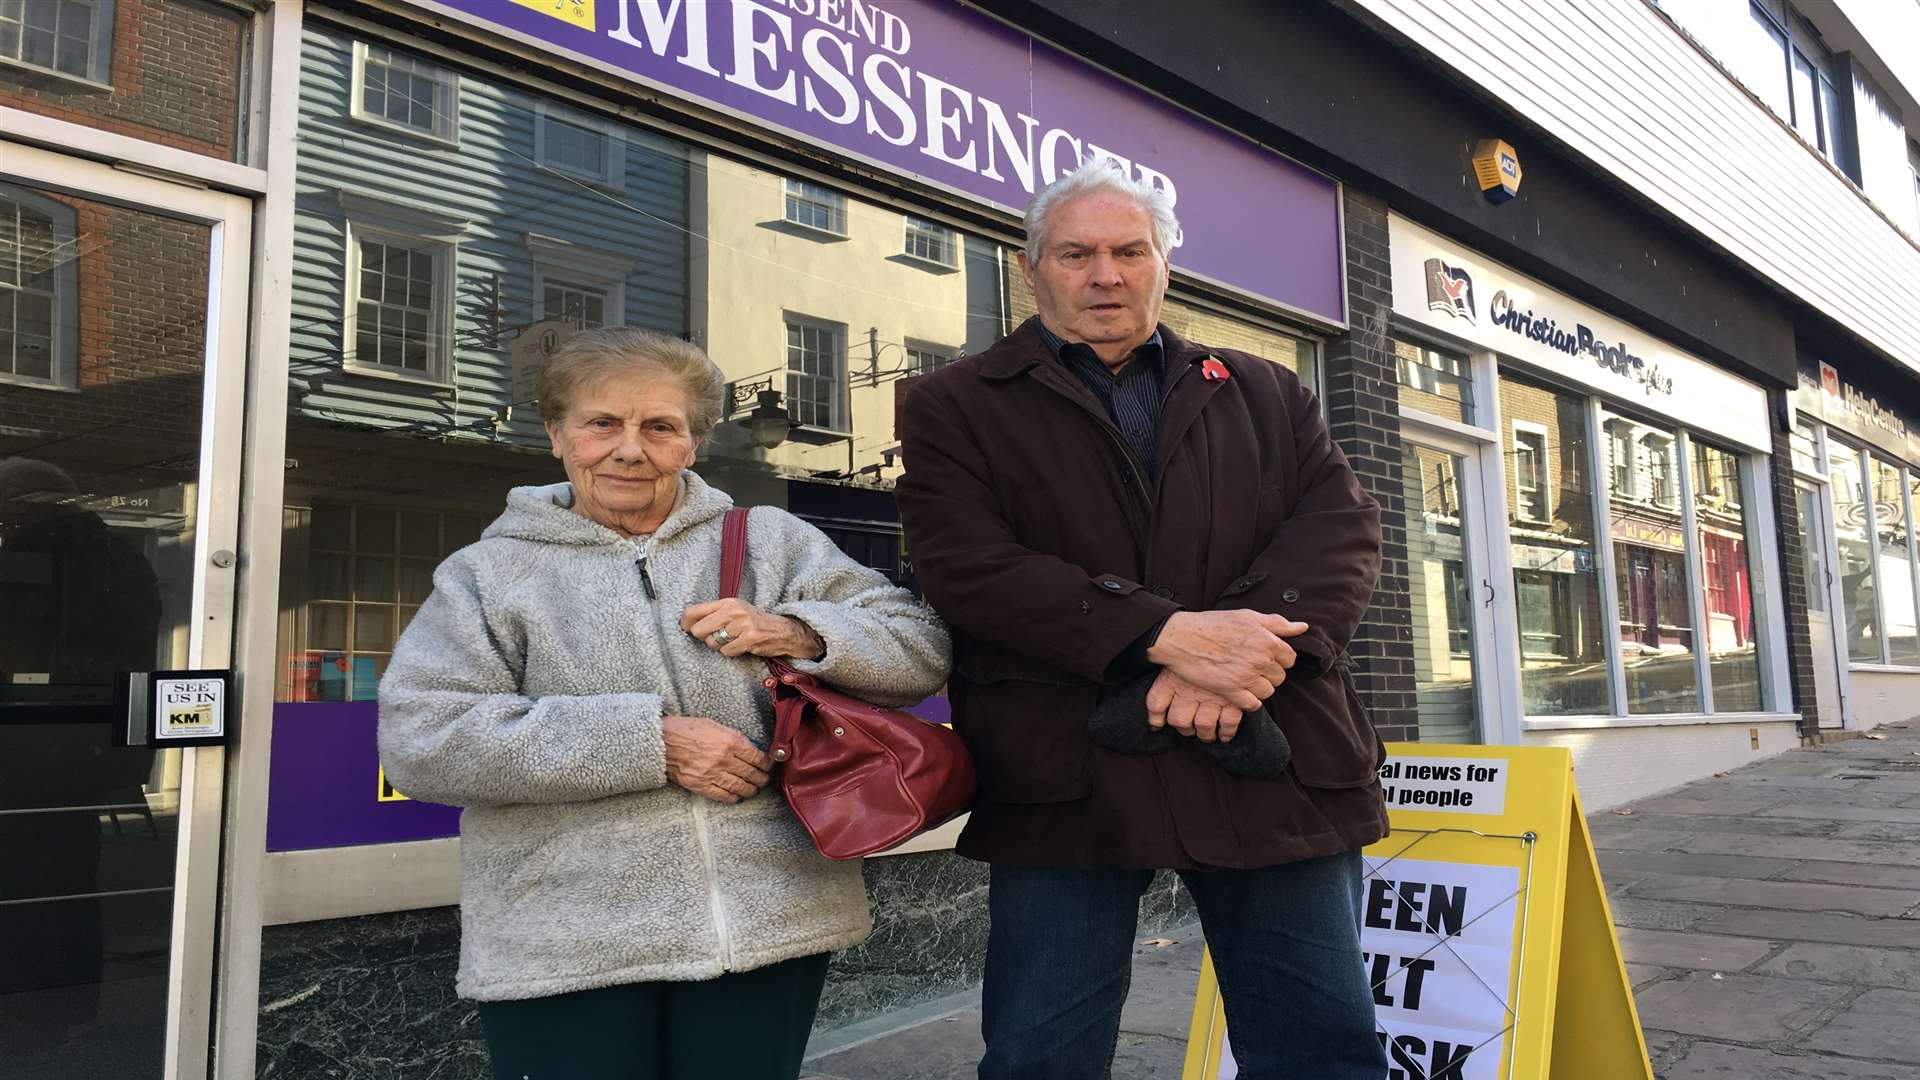 Terence Knight with his wife,June, outside the Gravesend Messenger's office in the High Street, Gravesend